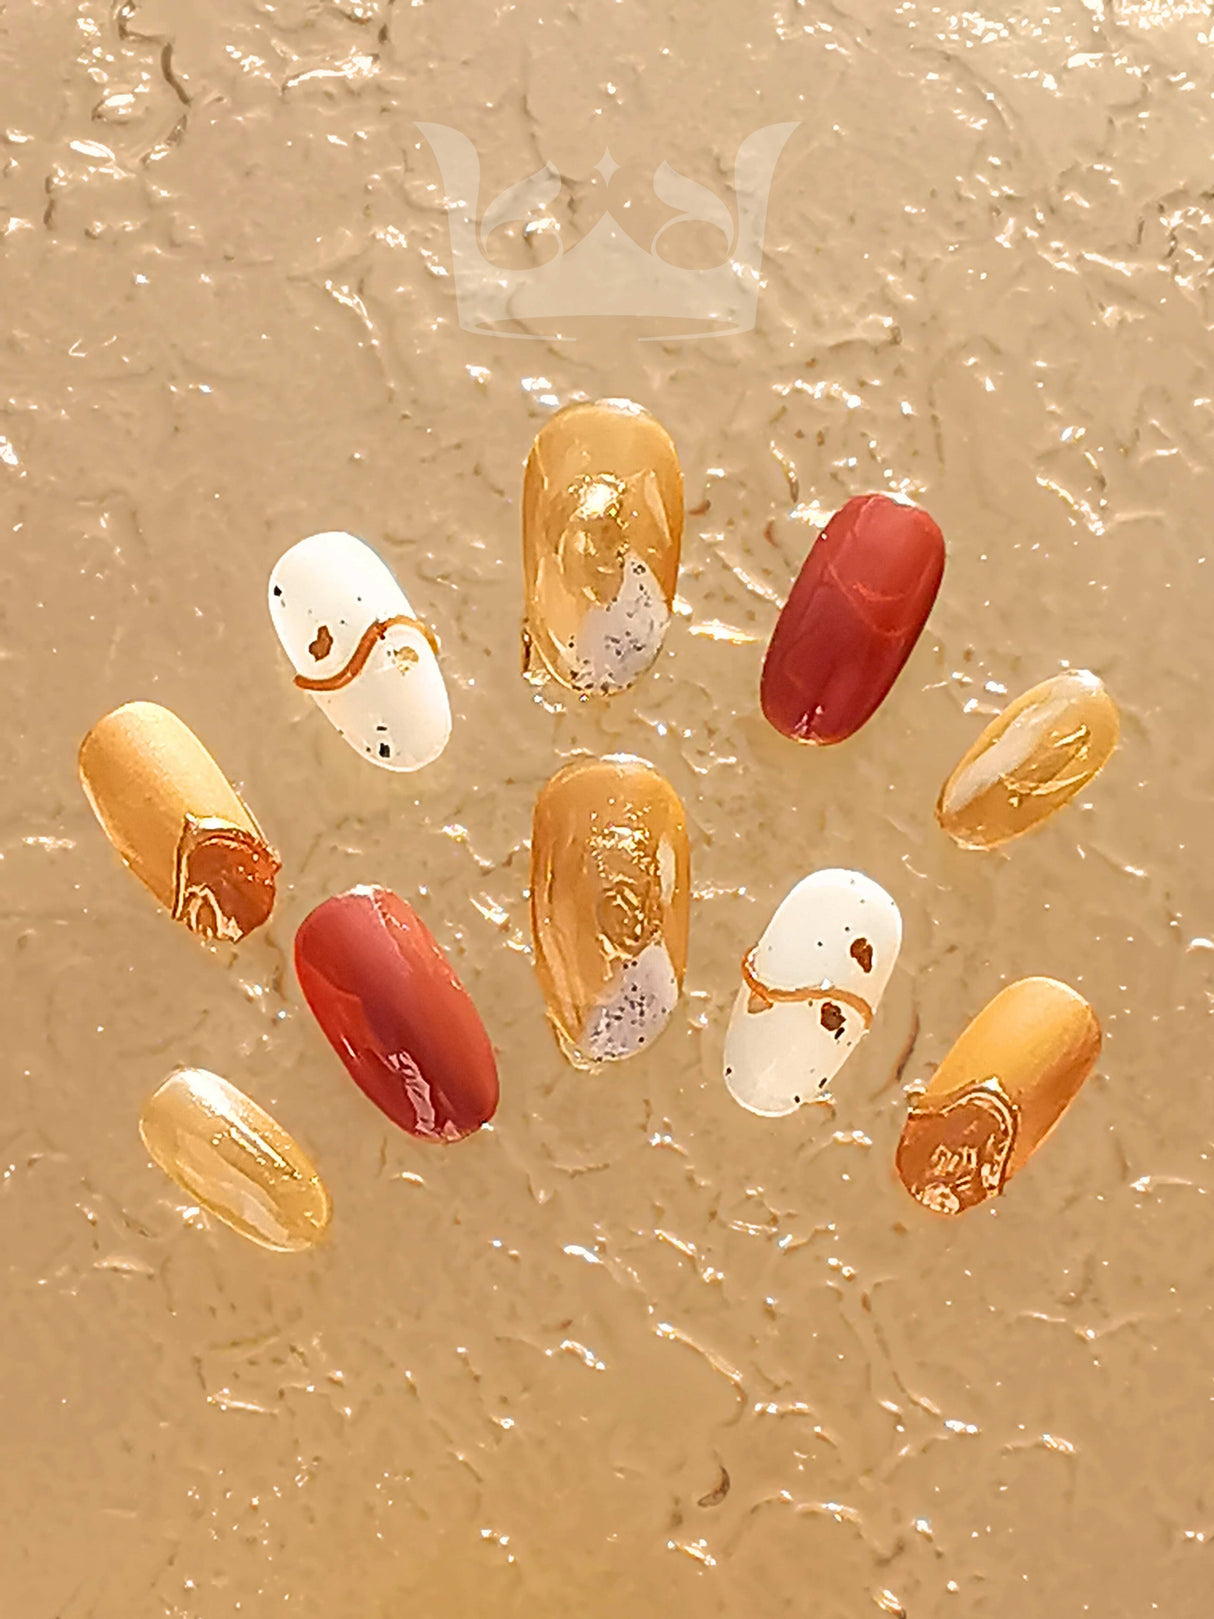 Luxurious and festive nails for special occasions with gold, white, and red color palette, metallic finishes, dripping gold accents, and glitter decorations. Perfect for formal events.